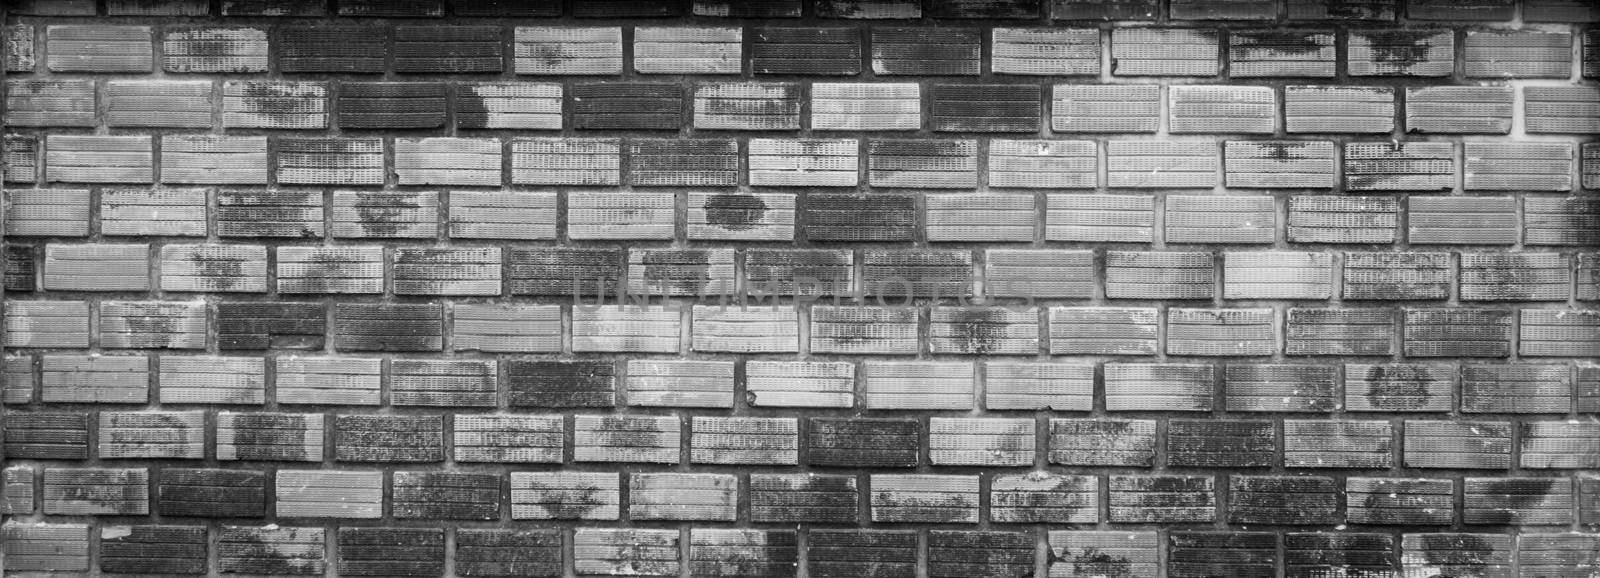 Black and white of old brick wall texture background. by Fahroni